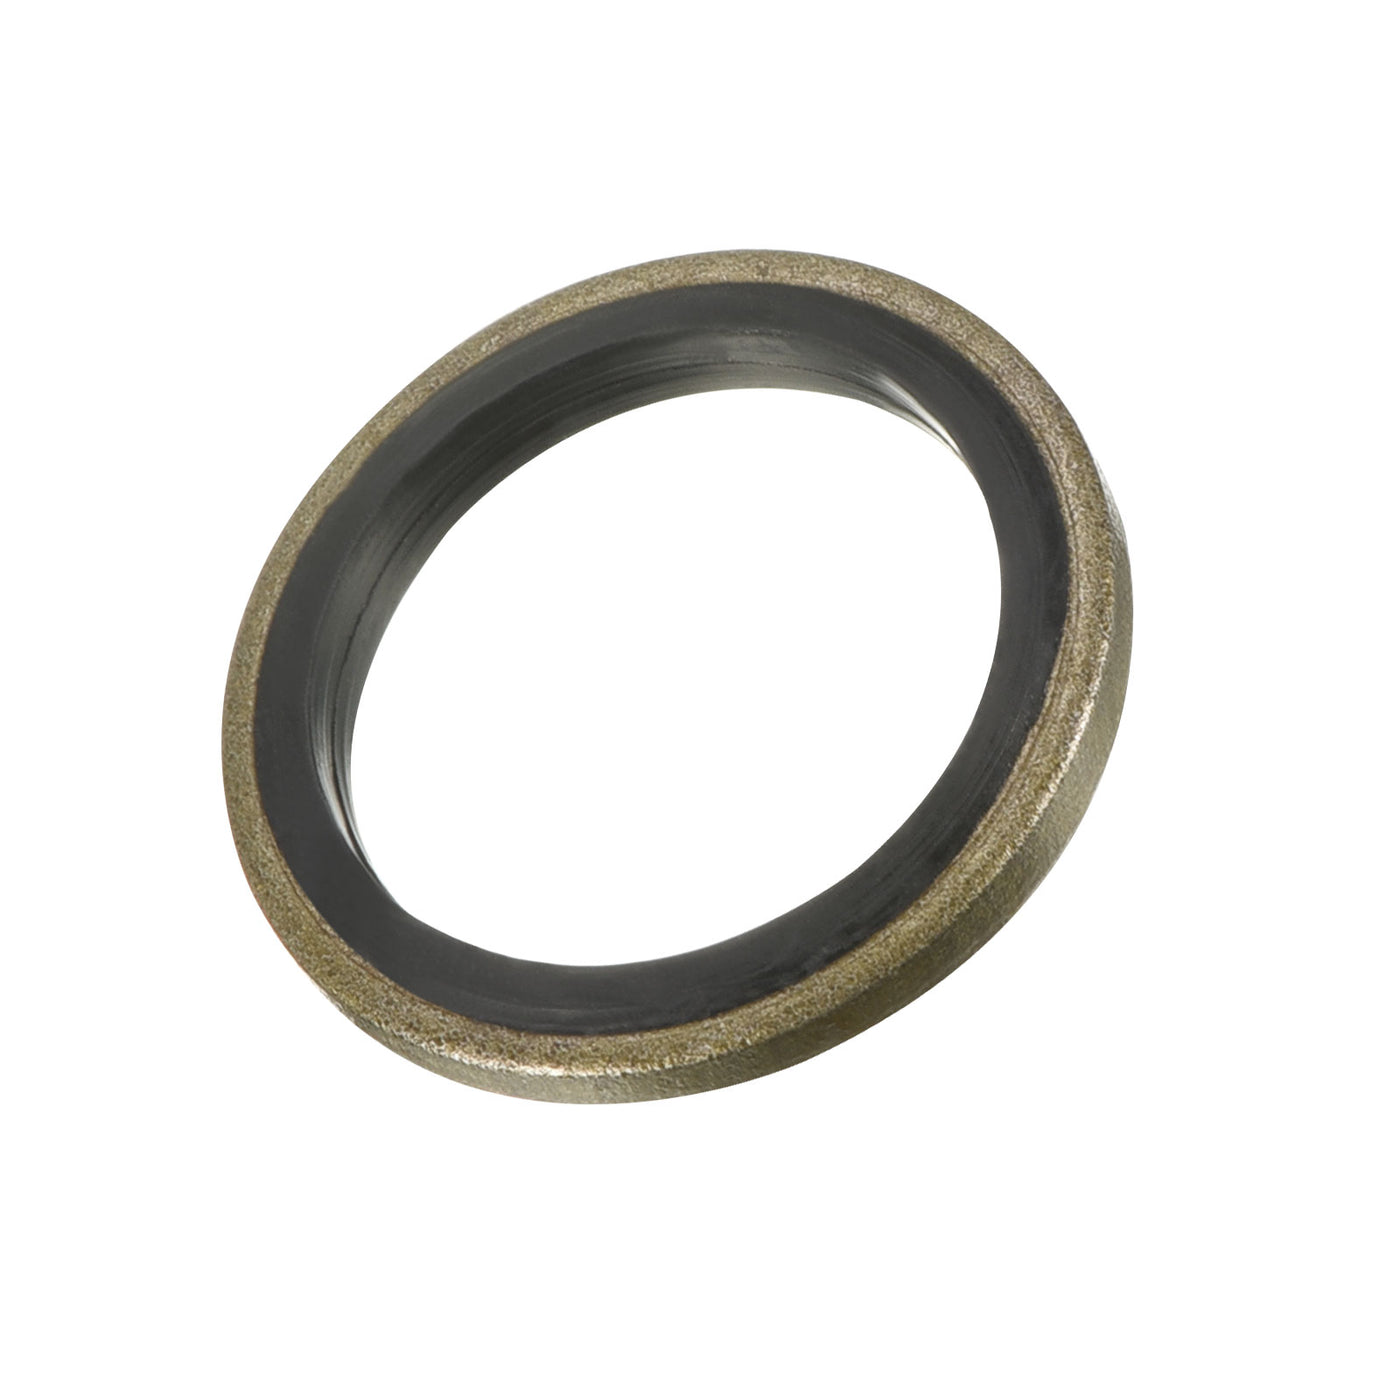 Harfington Bonded Sealing Washers M16 21.54x16x2mm Carbon Steel Nitrile Rubber Gasket, Pack of 10